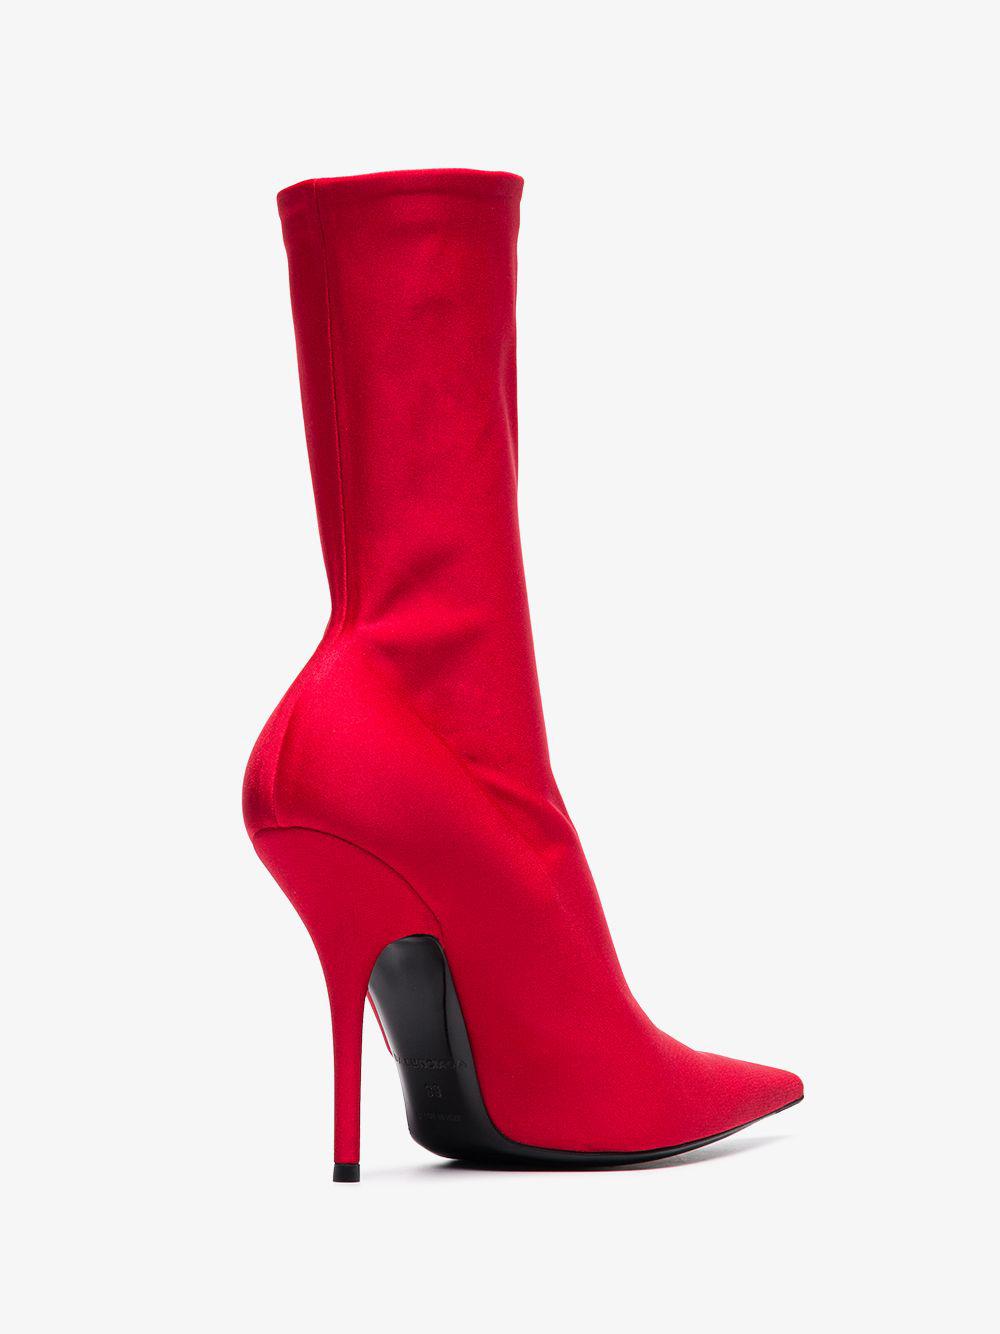 Balenciaga Knife Stretch Knit Bootie in Red